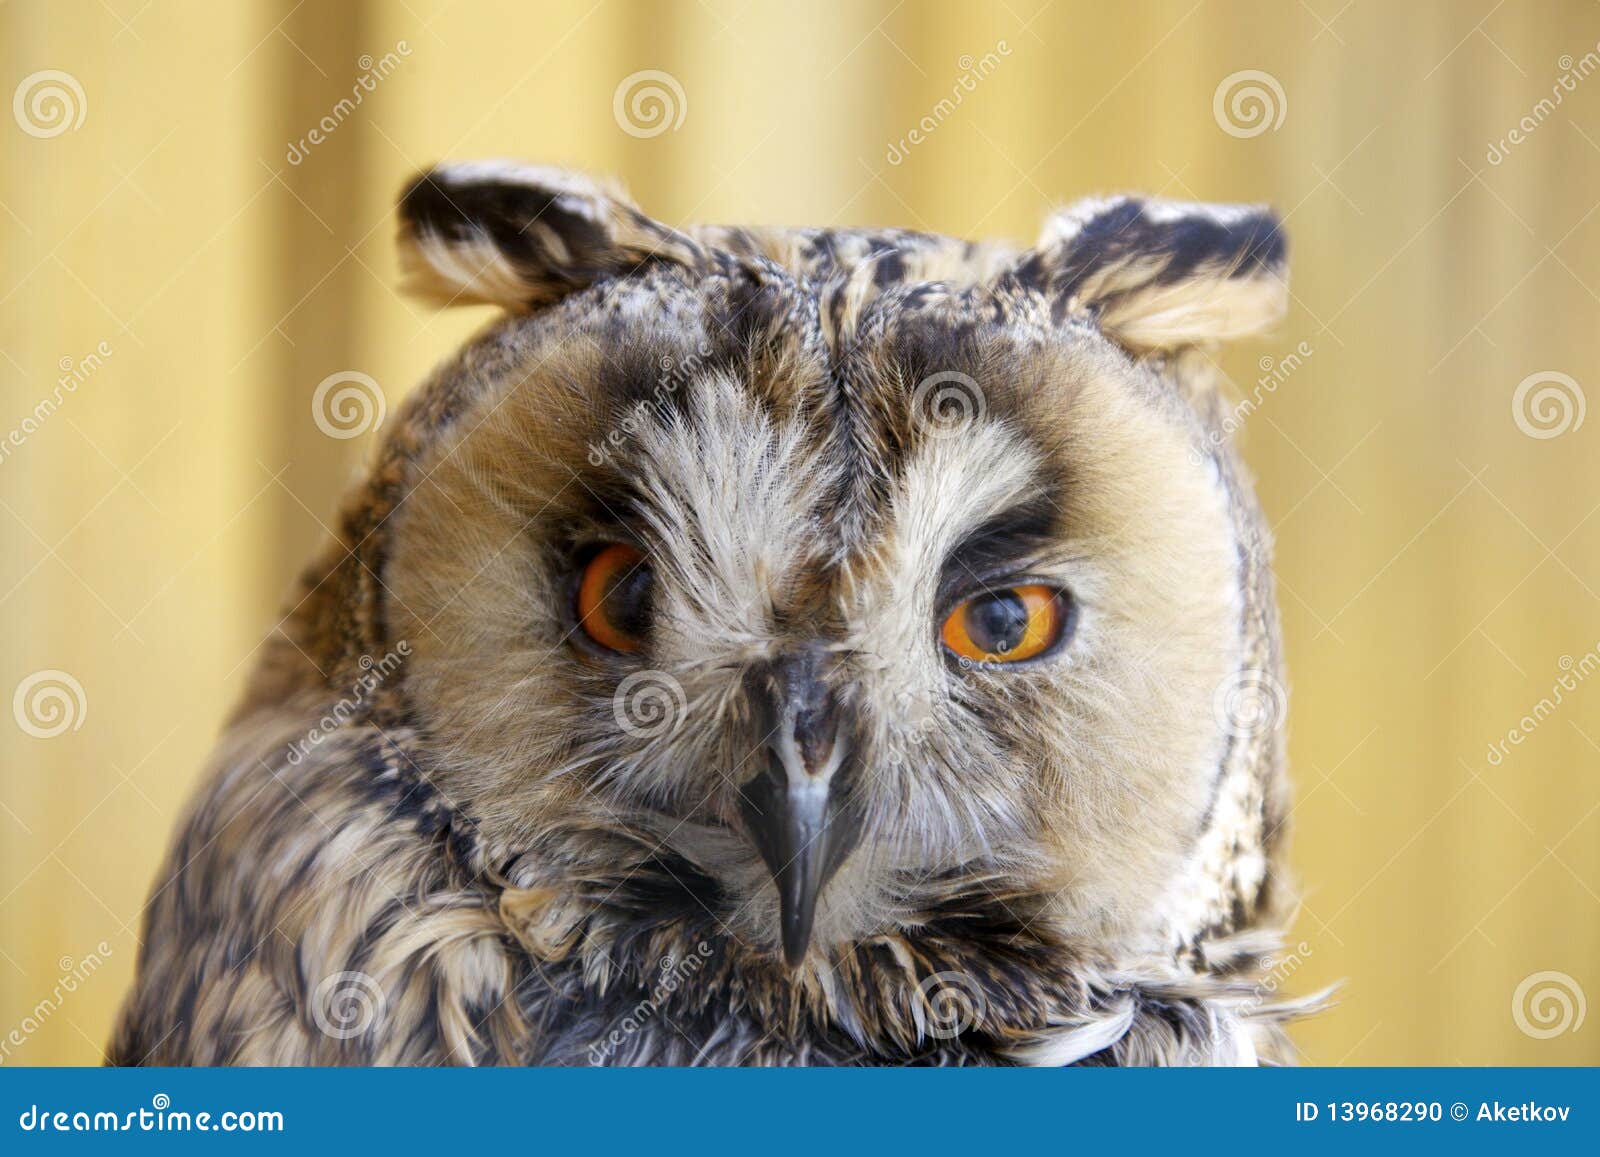 Long-eared Owl stock photo. Image of feathers, flight - 13968290